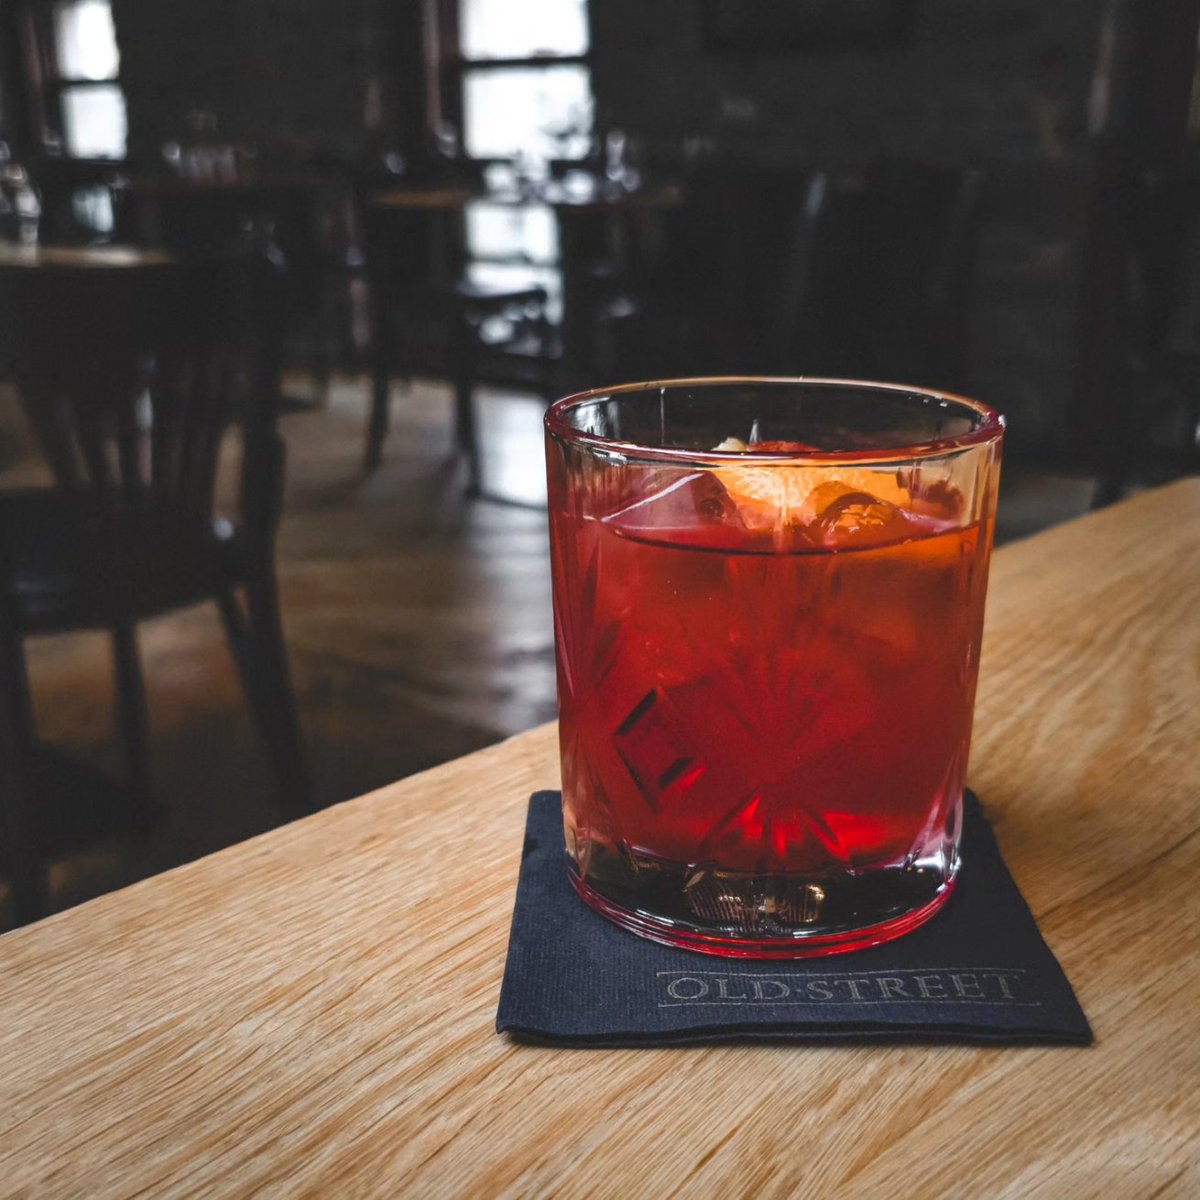 BALMY TUESDAY! Refreshing on even a cloudy day, our new LILLET NEGRONI with Strawberry Infused Bombay Sapphire Gin, Lillet Blanc Liqueur, and Campari - Simple, elegant, and straight to the point 🍓 We're open from 5pm! #oldstreetcocktails #oldstreetbar #oldstreetdublin